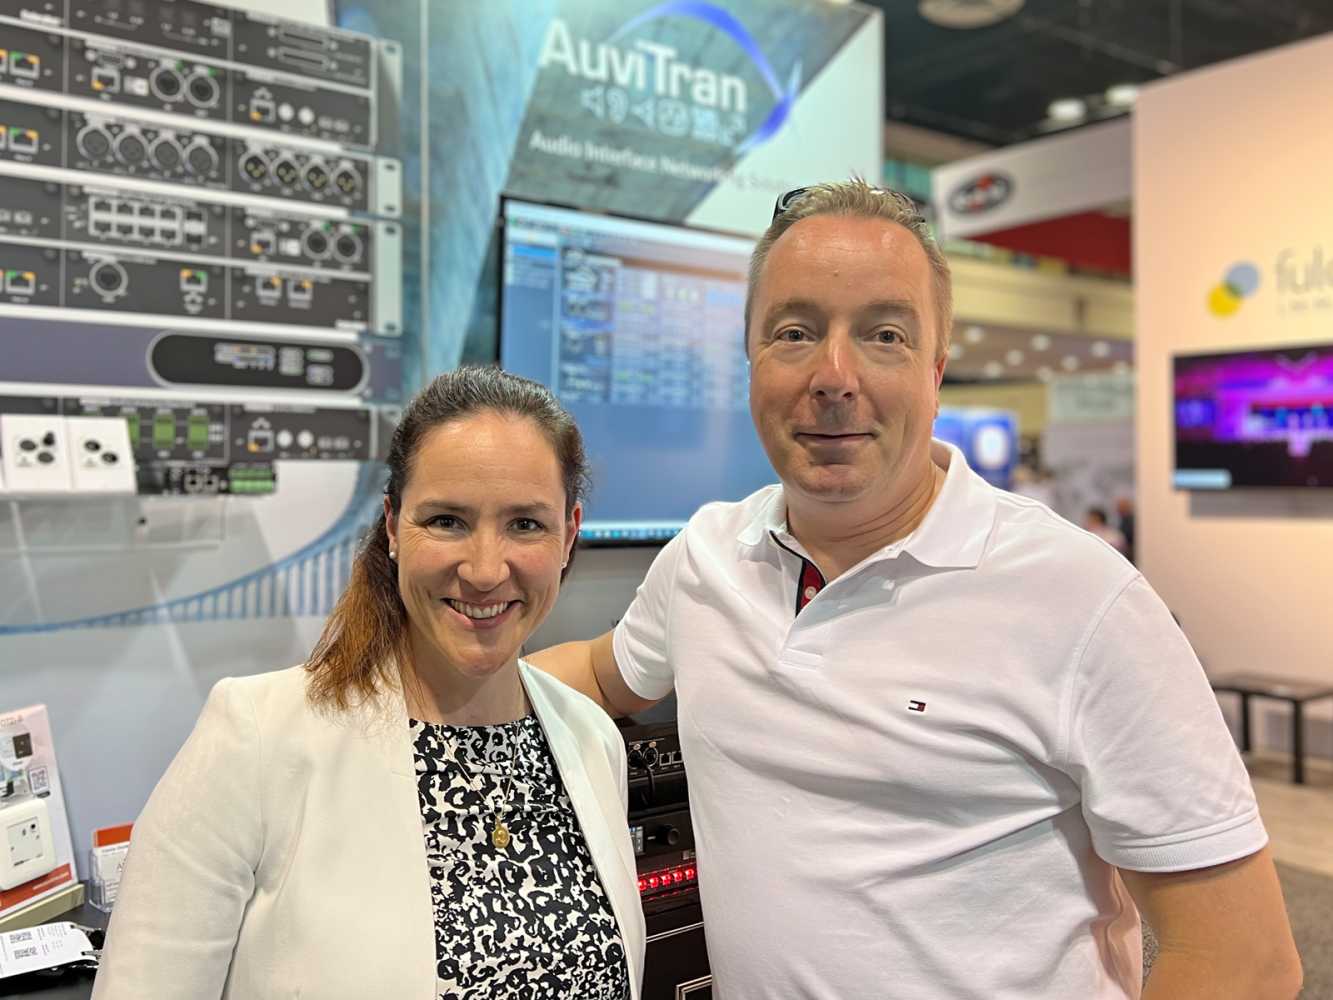 Cianna David-Kivlehan of Auvitran and Stuart Thomson of CUK on the Auvitran Booth at InfoComm